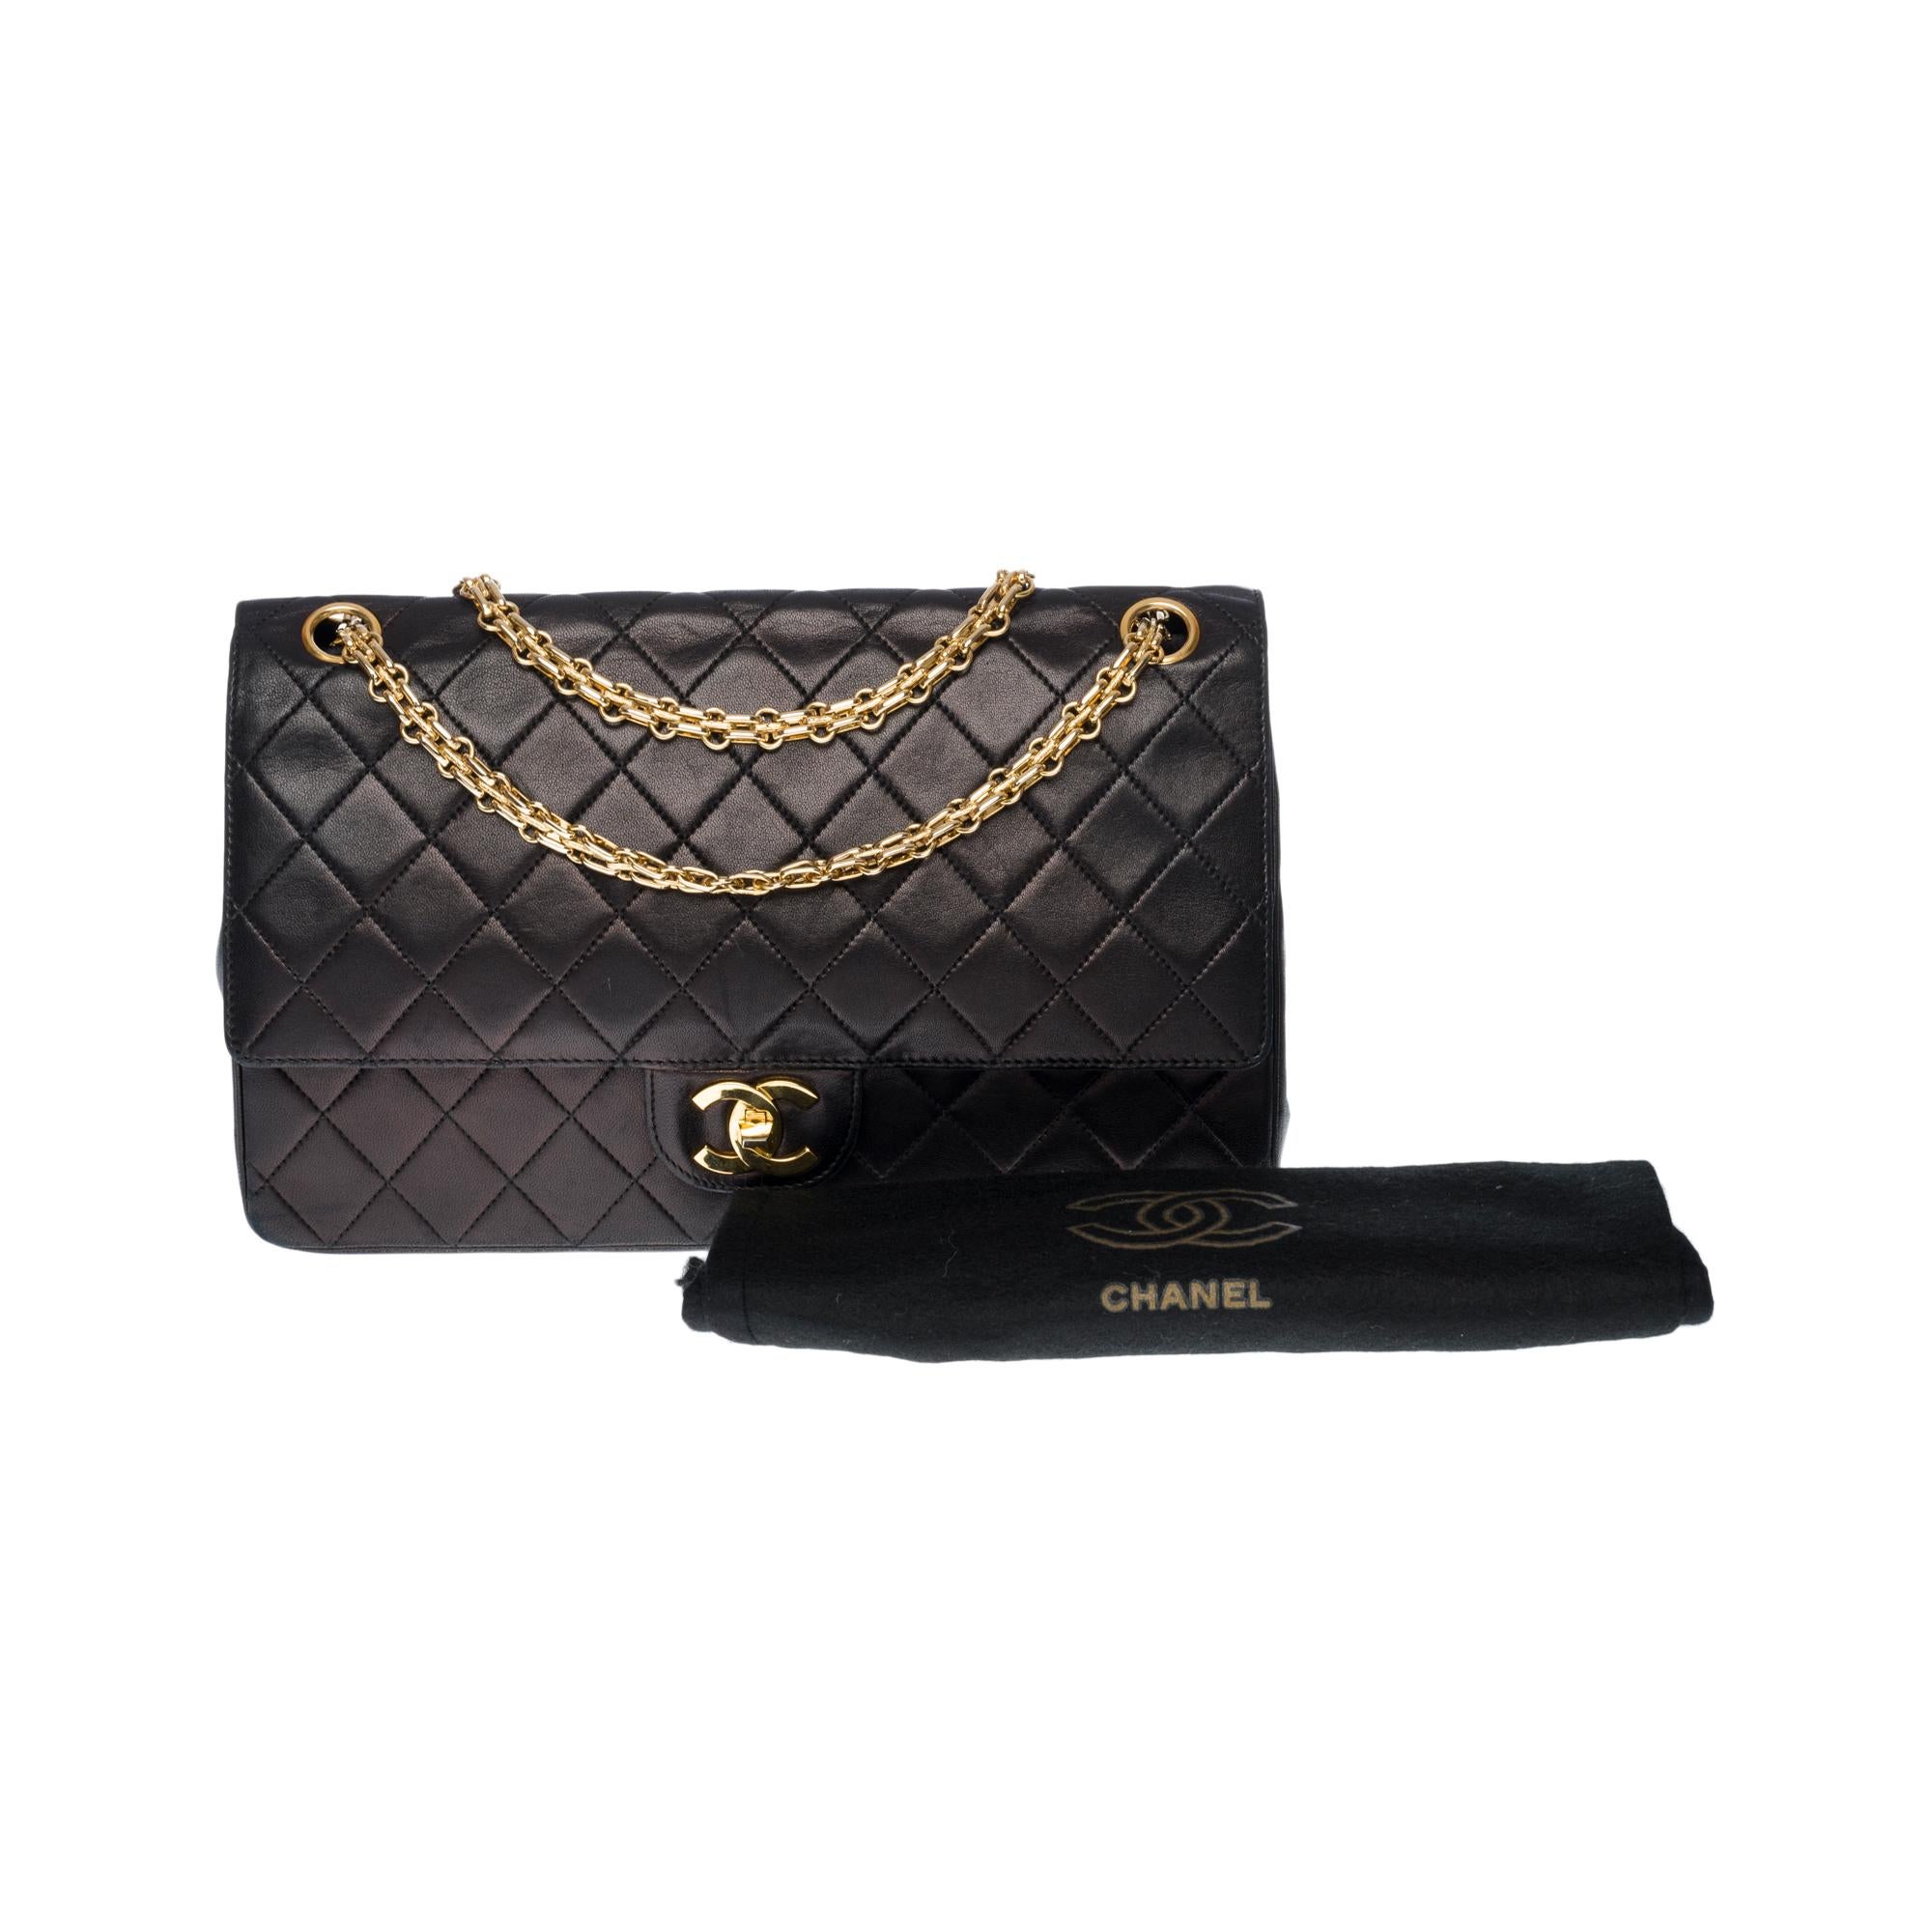 Chanel Timeless/Classic double Flap shoulder bag in black quilted lambskin, GHW 6